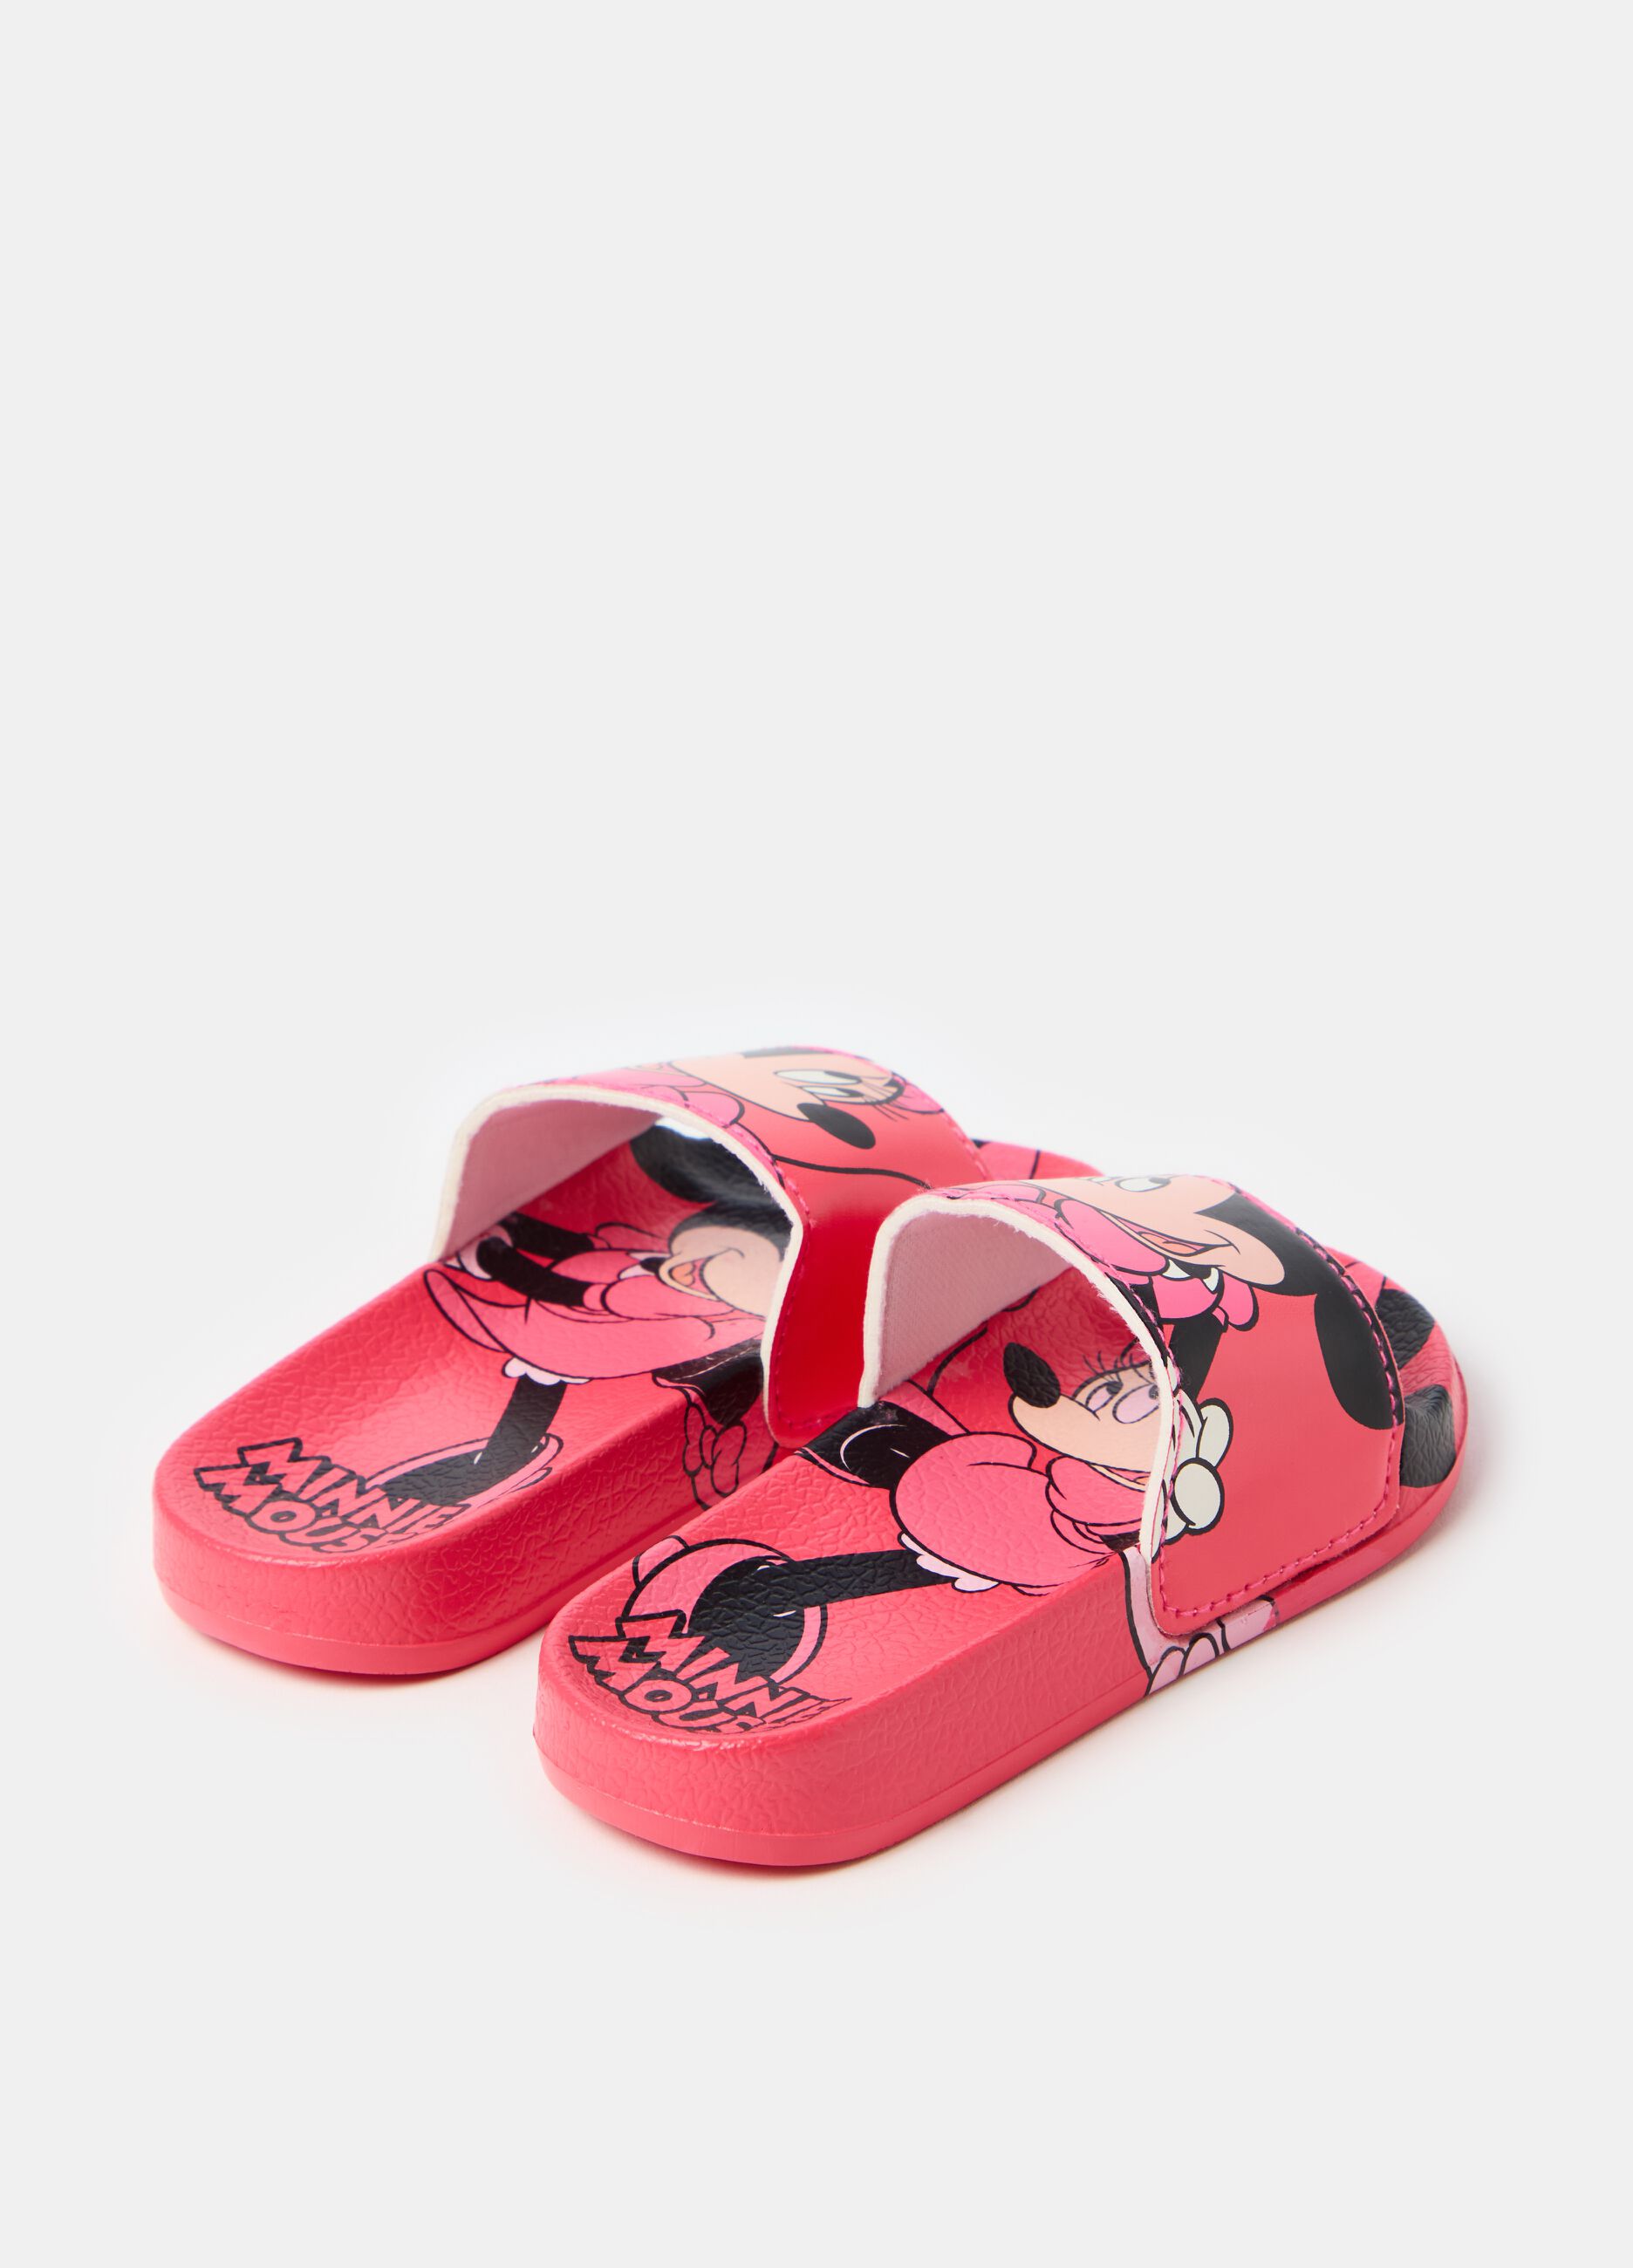 Minnie Mouse slippers